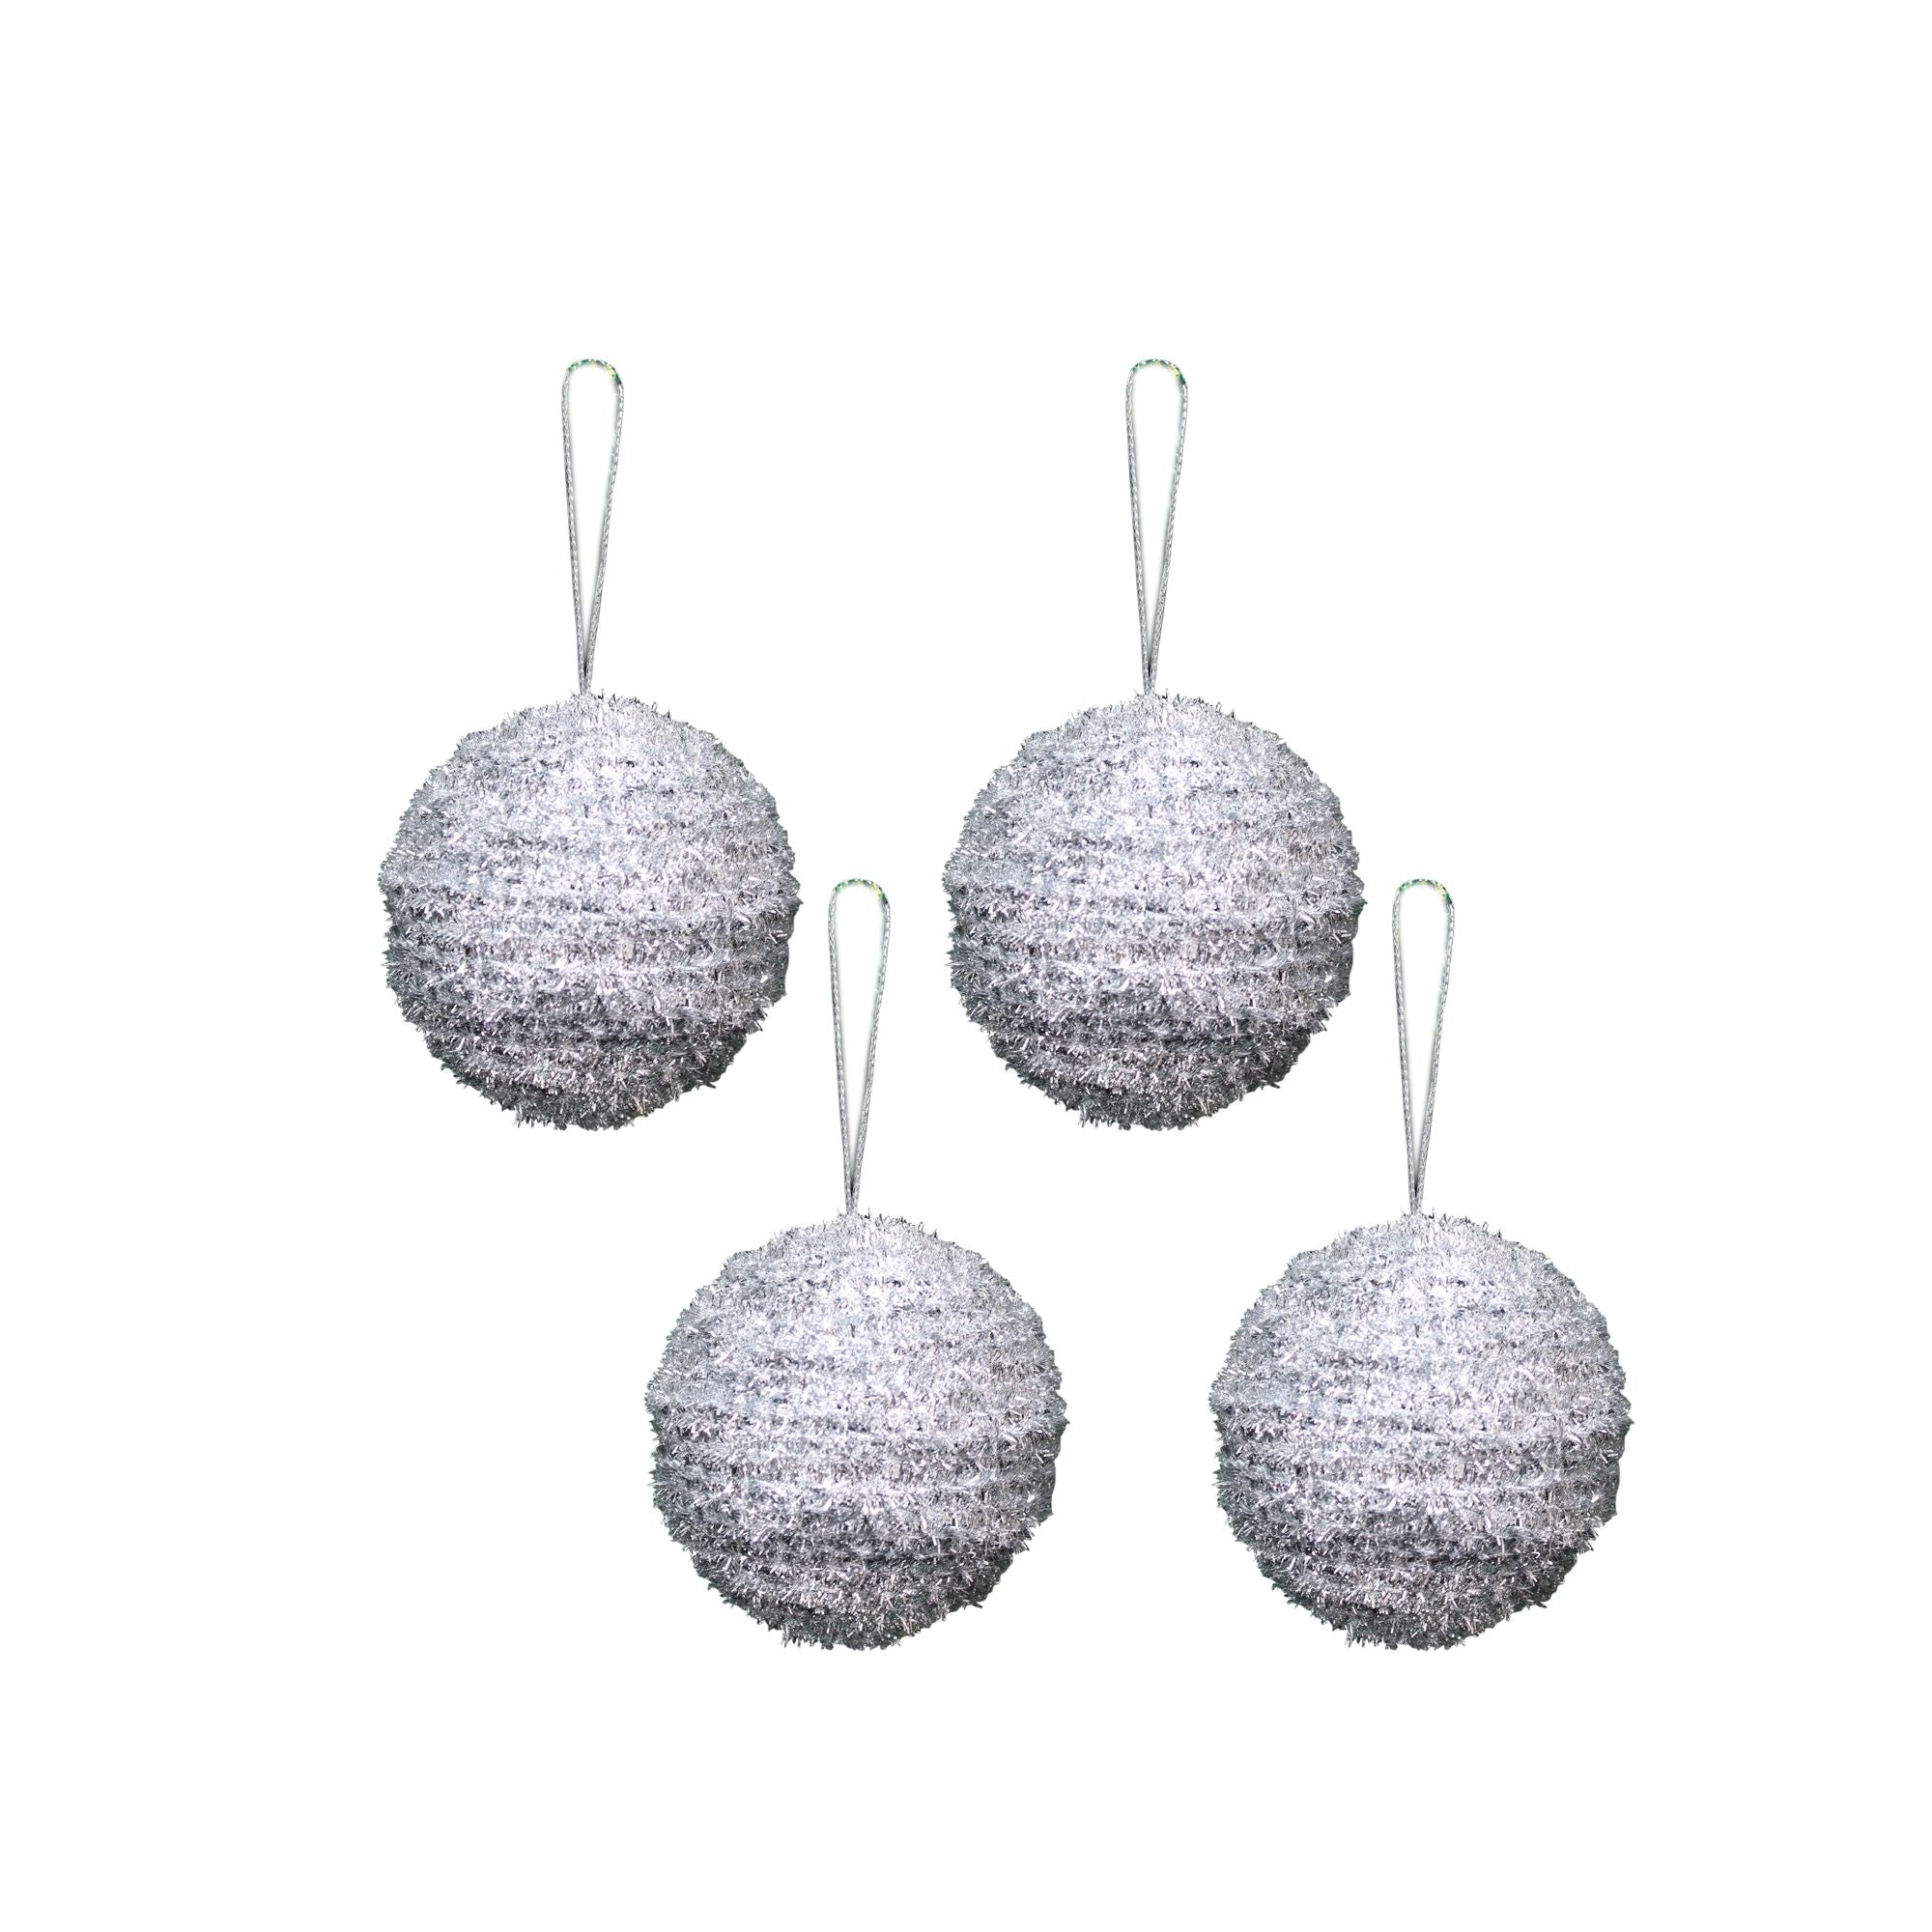 Handmade Christmas Ornaments Tinsel Baubles - 60mm, Silver, 4pc